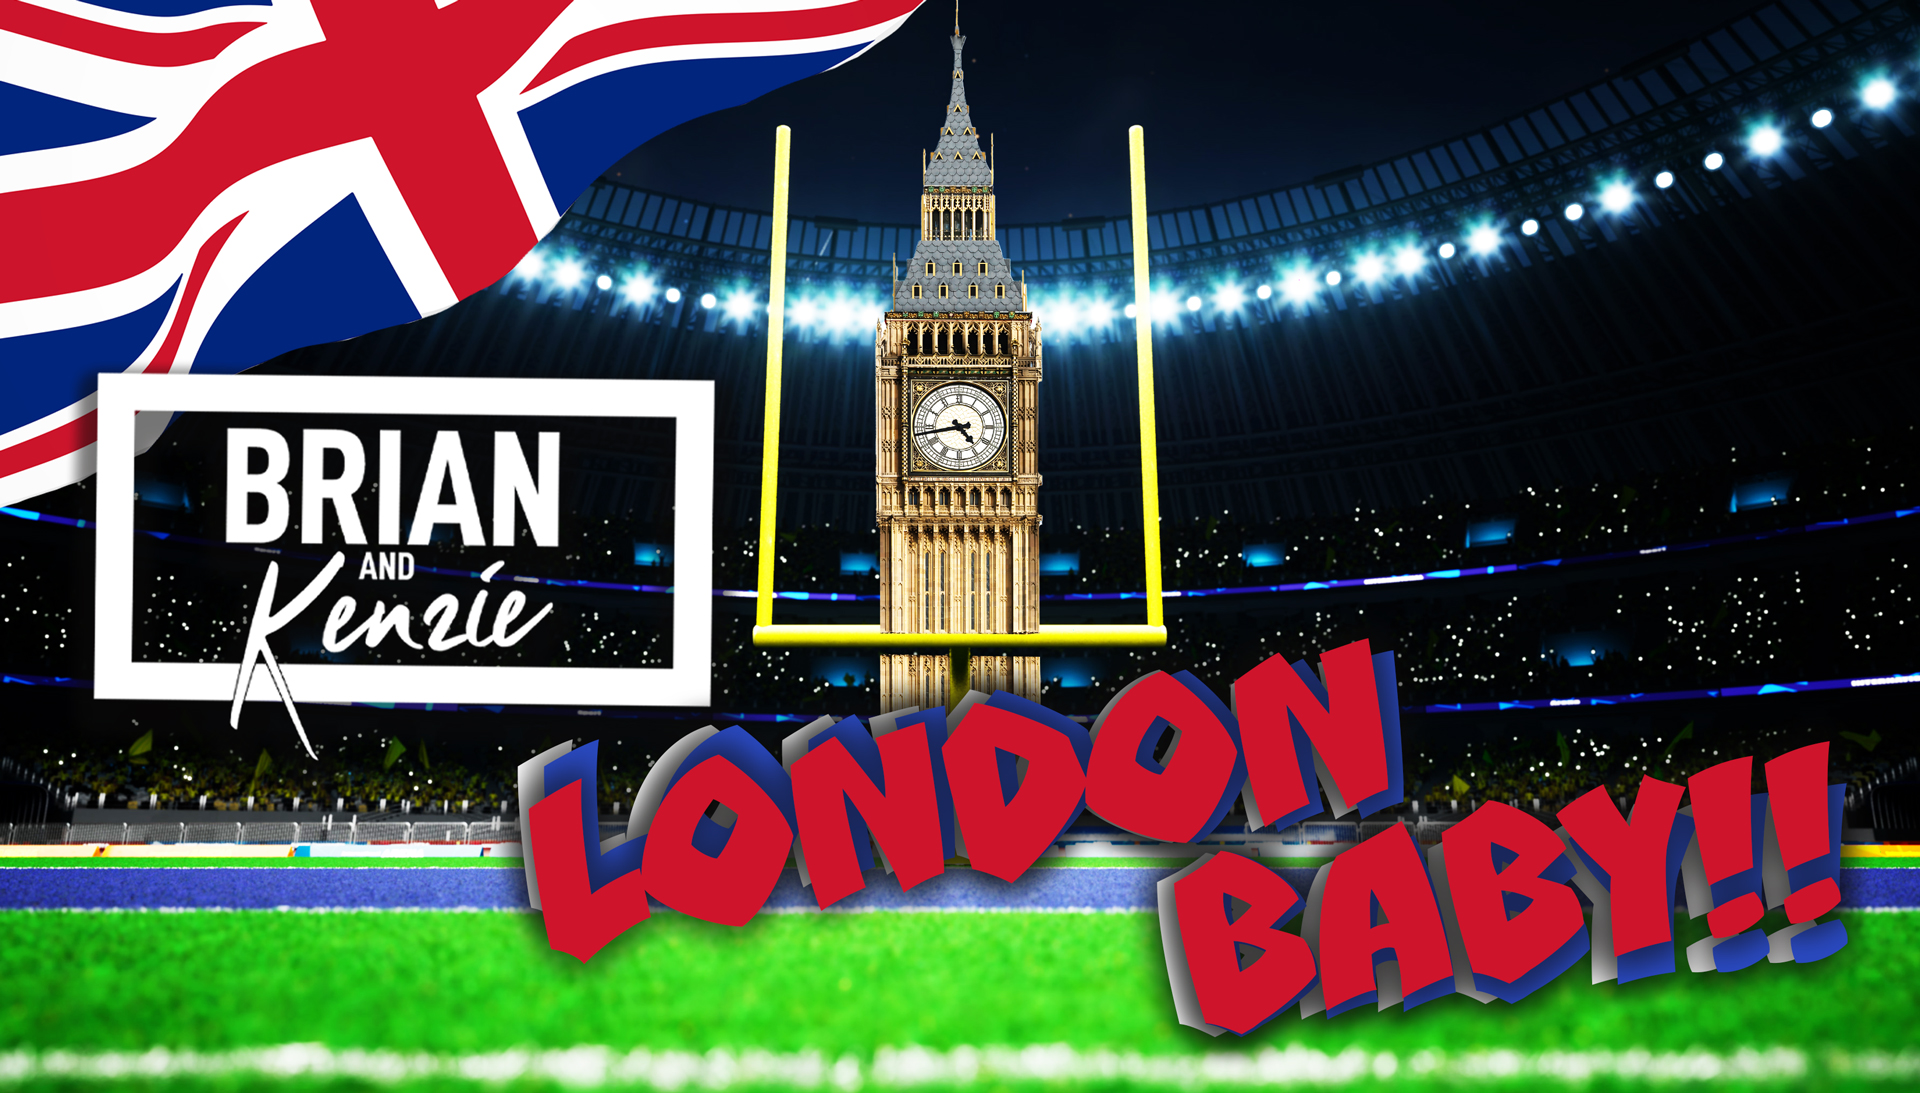 London Baby! Join Brian & Kenzie in London for Football, Fish & Chips, and more!